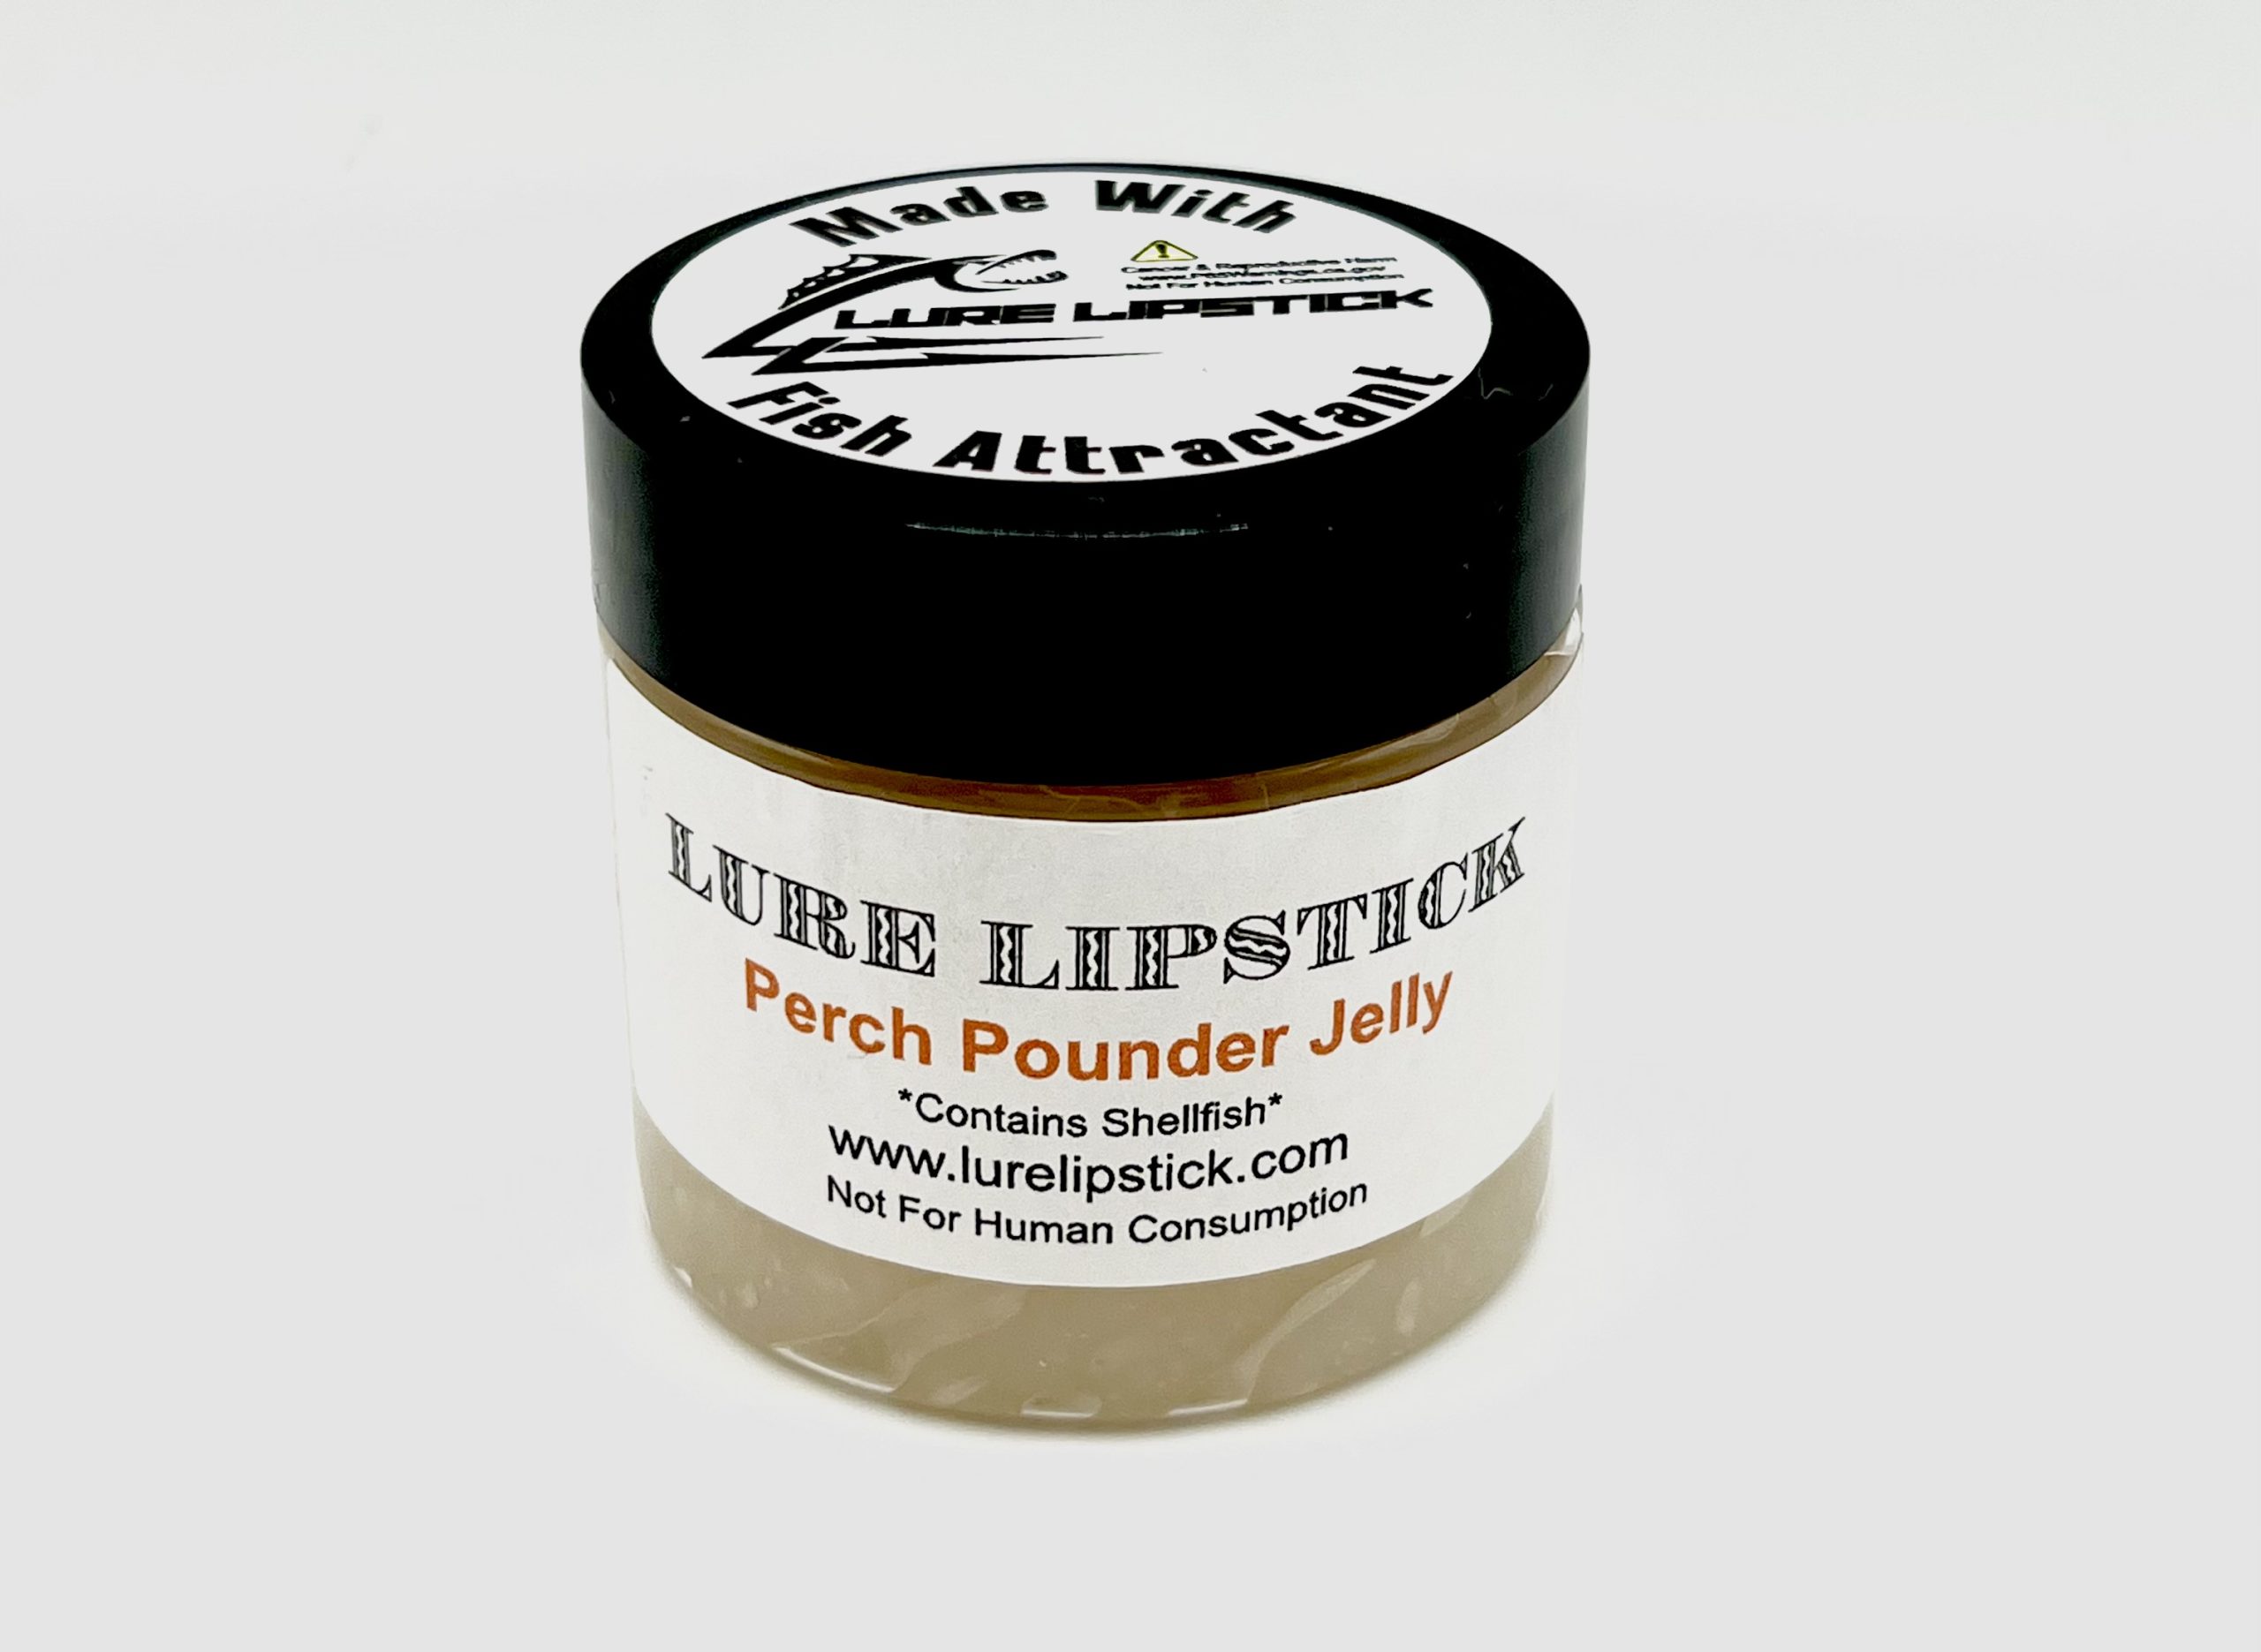 Lure Lipstick - Perch Pounder Jelly - 3oz. Container